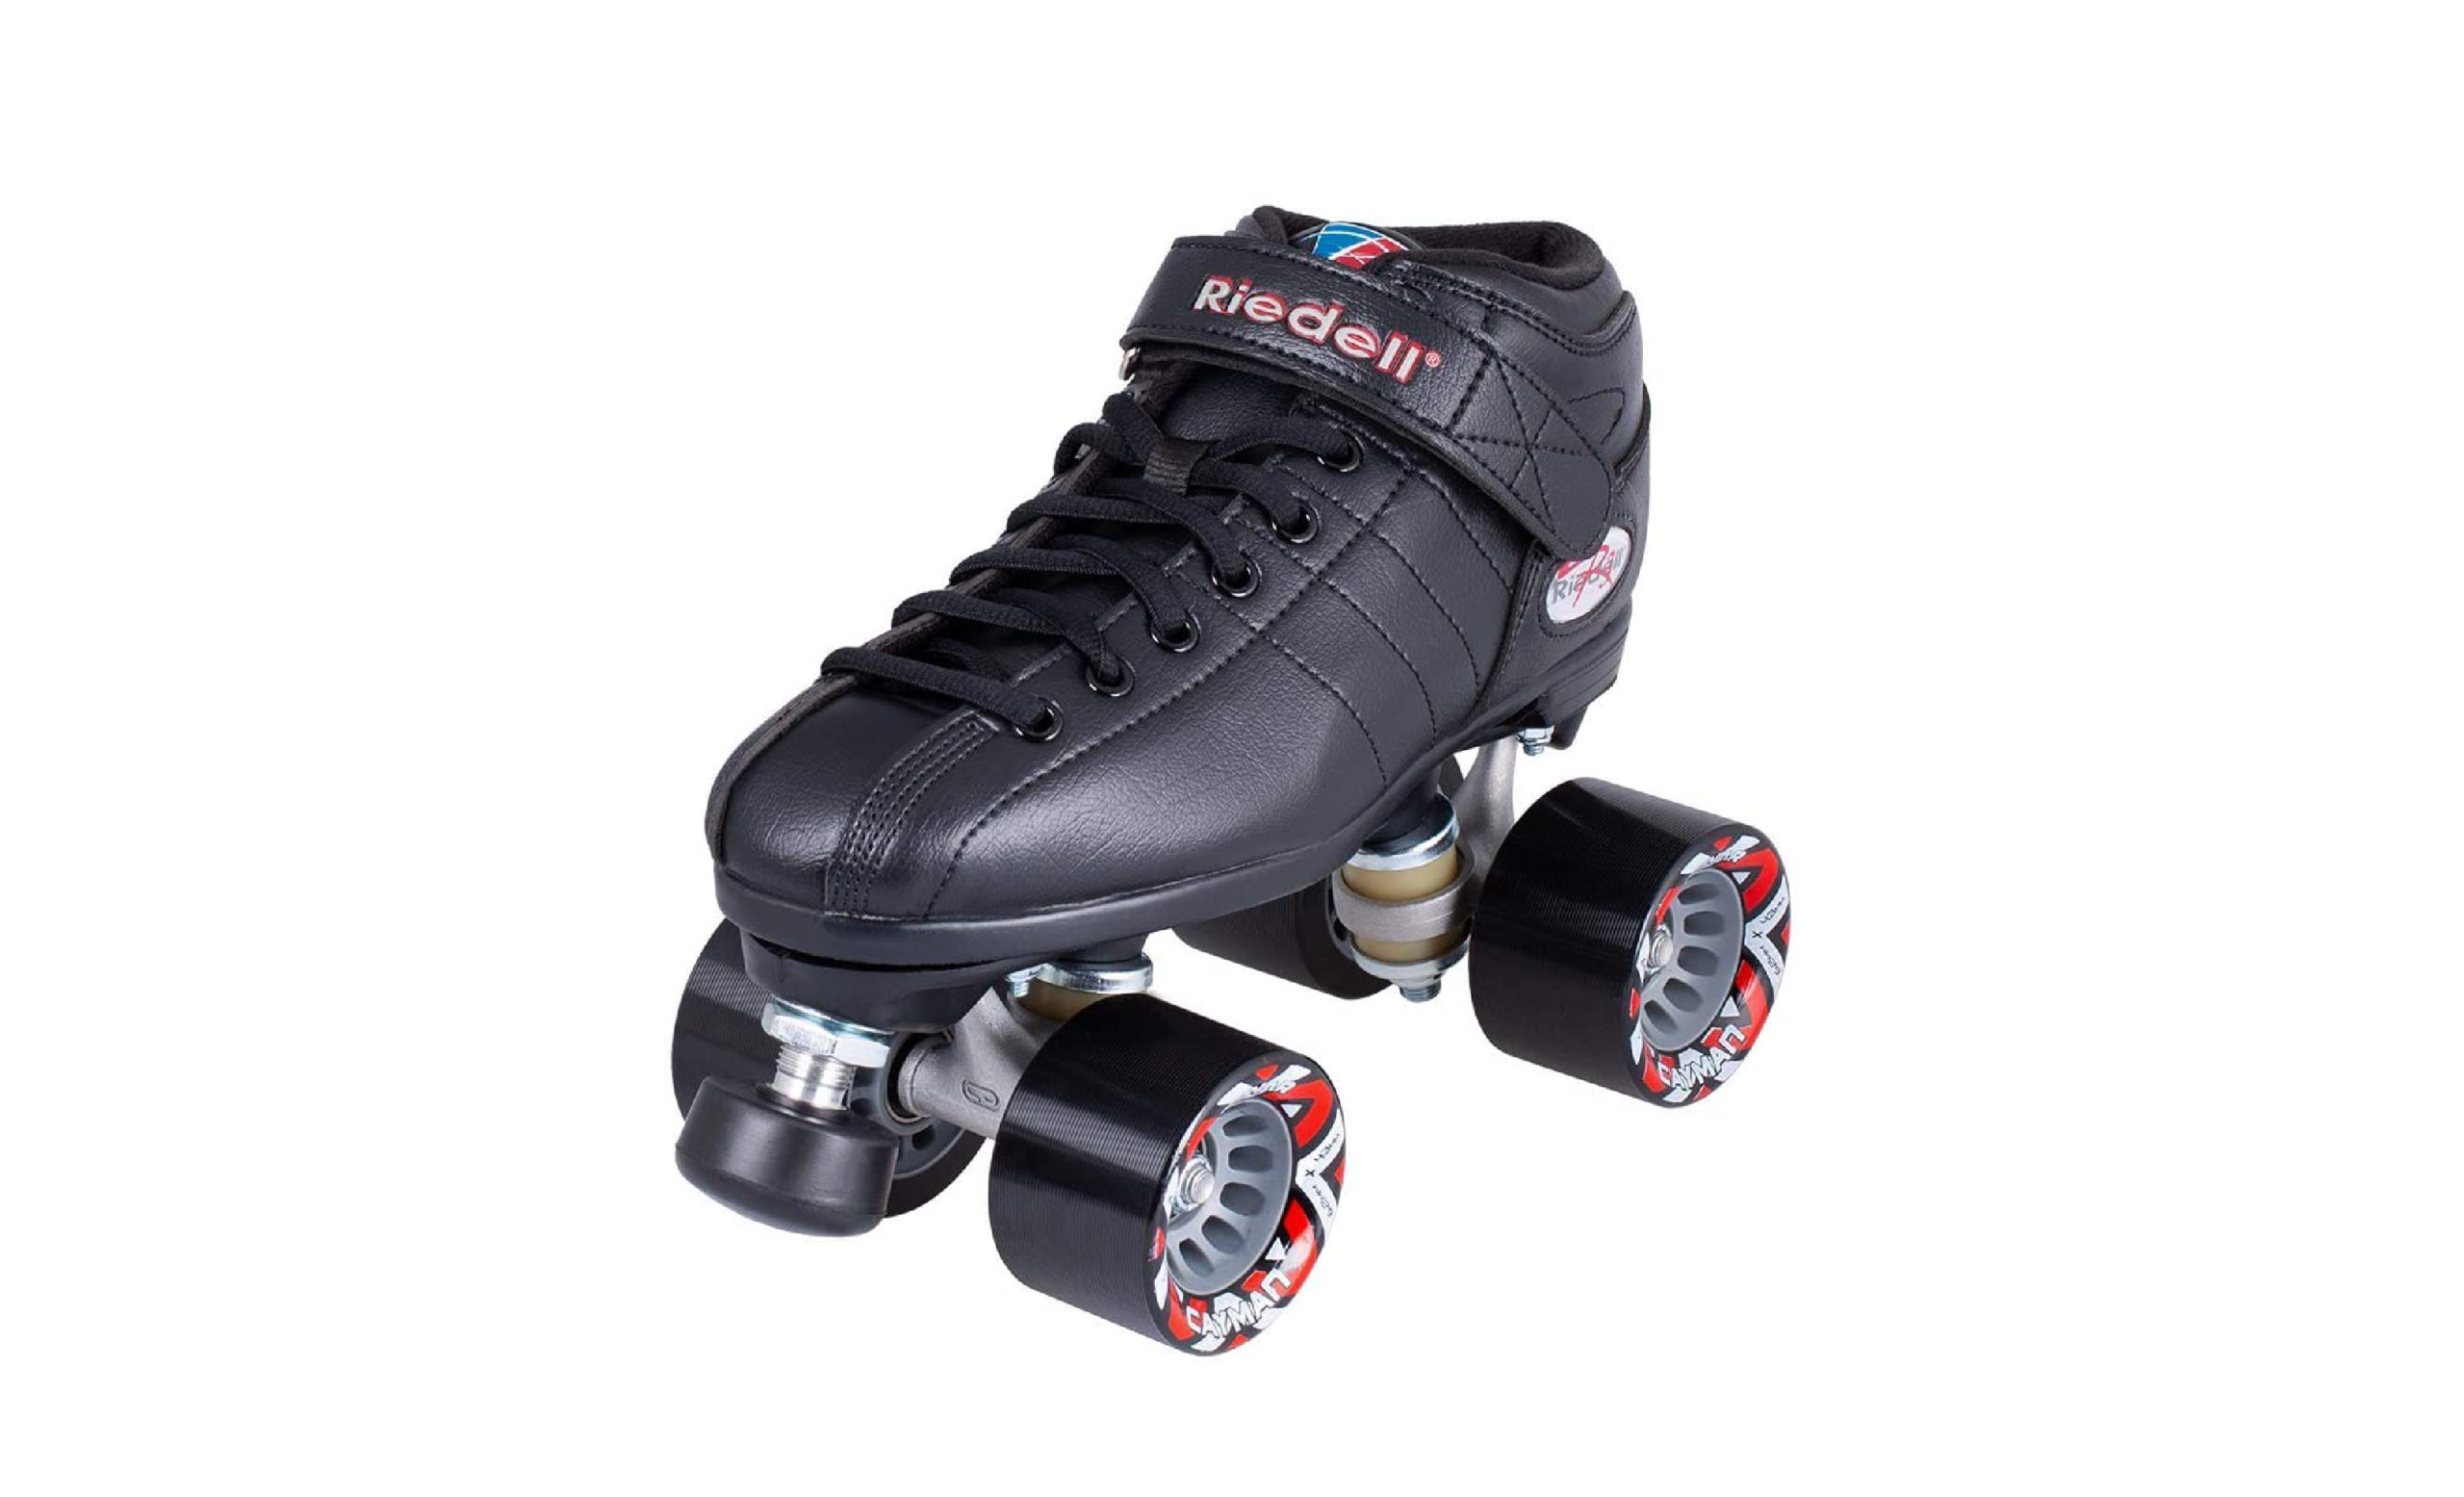 Top 5 Best Riedell Skates Review In 2021